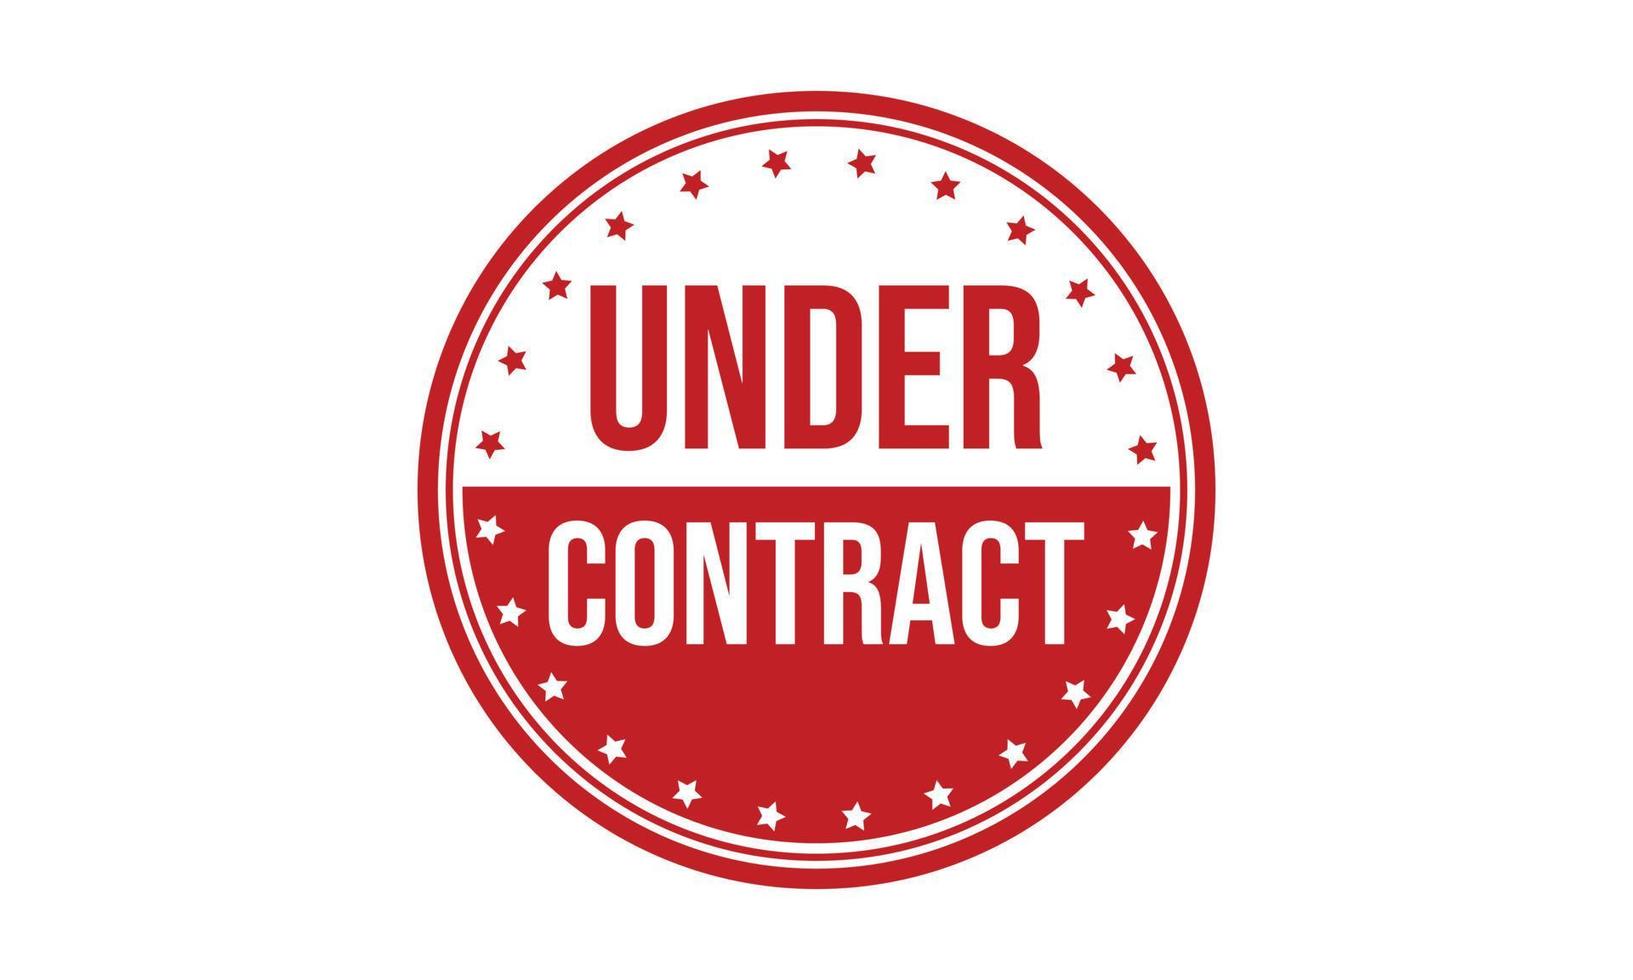 Under Contract Rubber Stamp. Under Contract Grunge Stamp Seal Vector Illustration